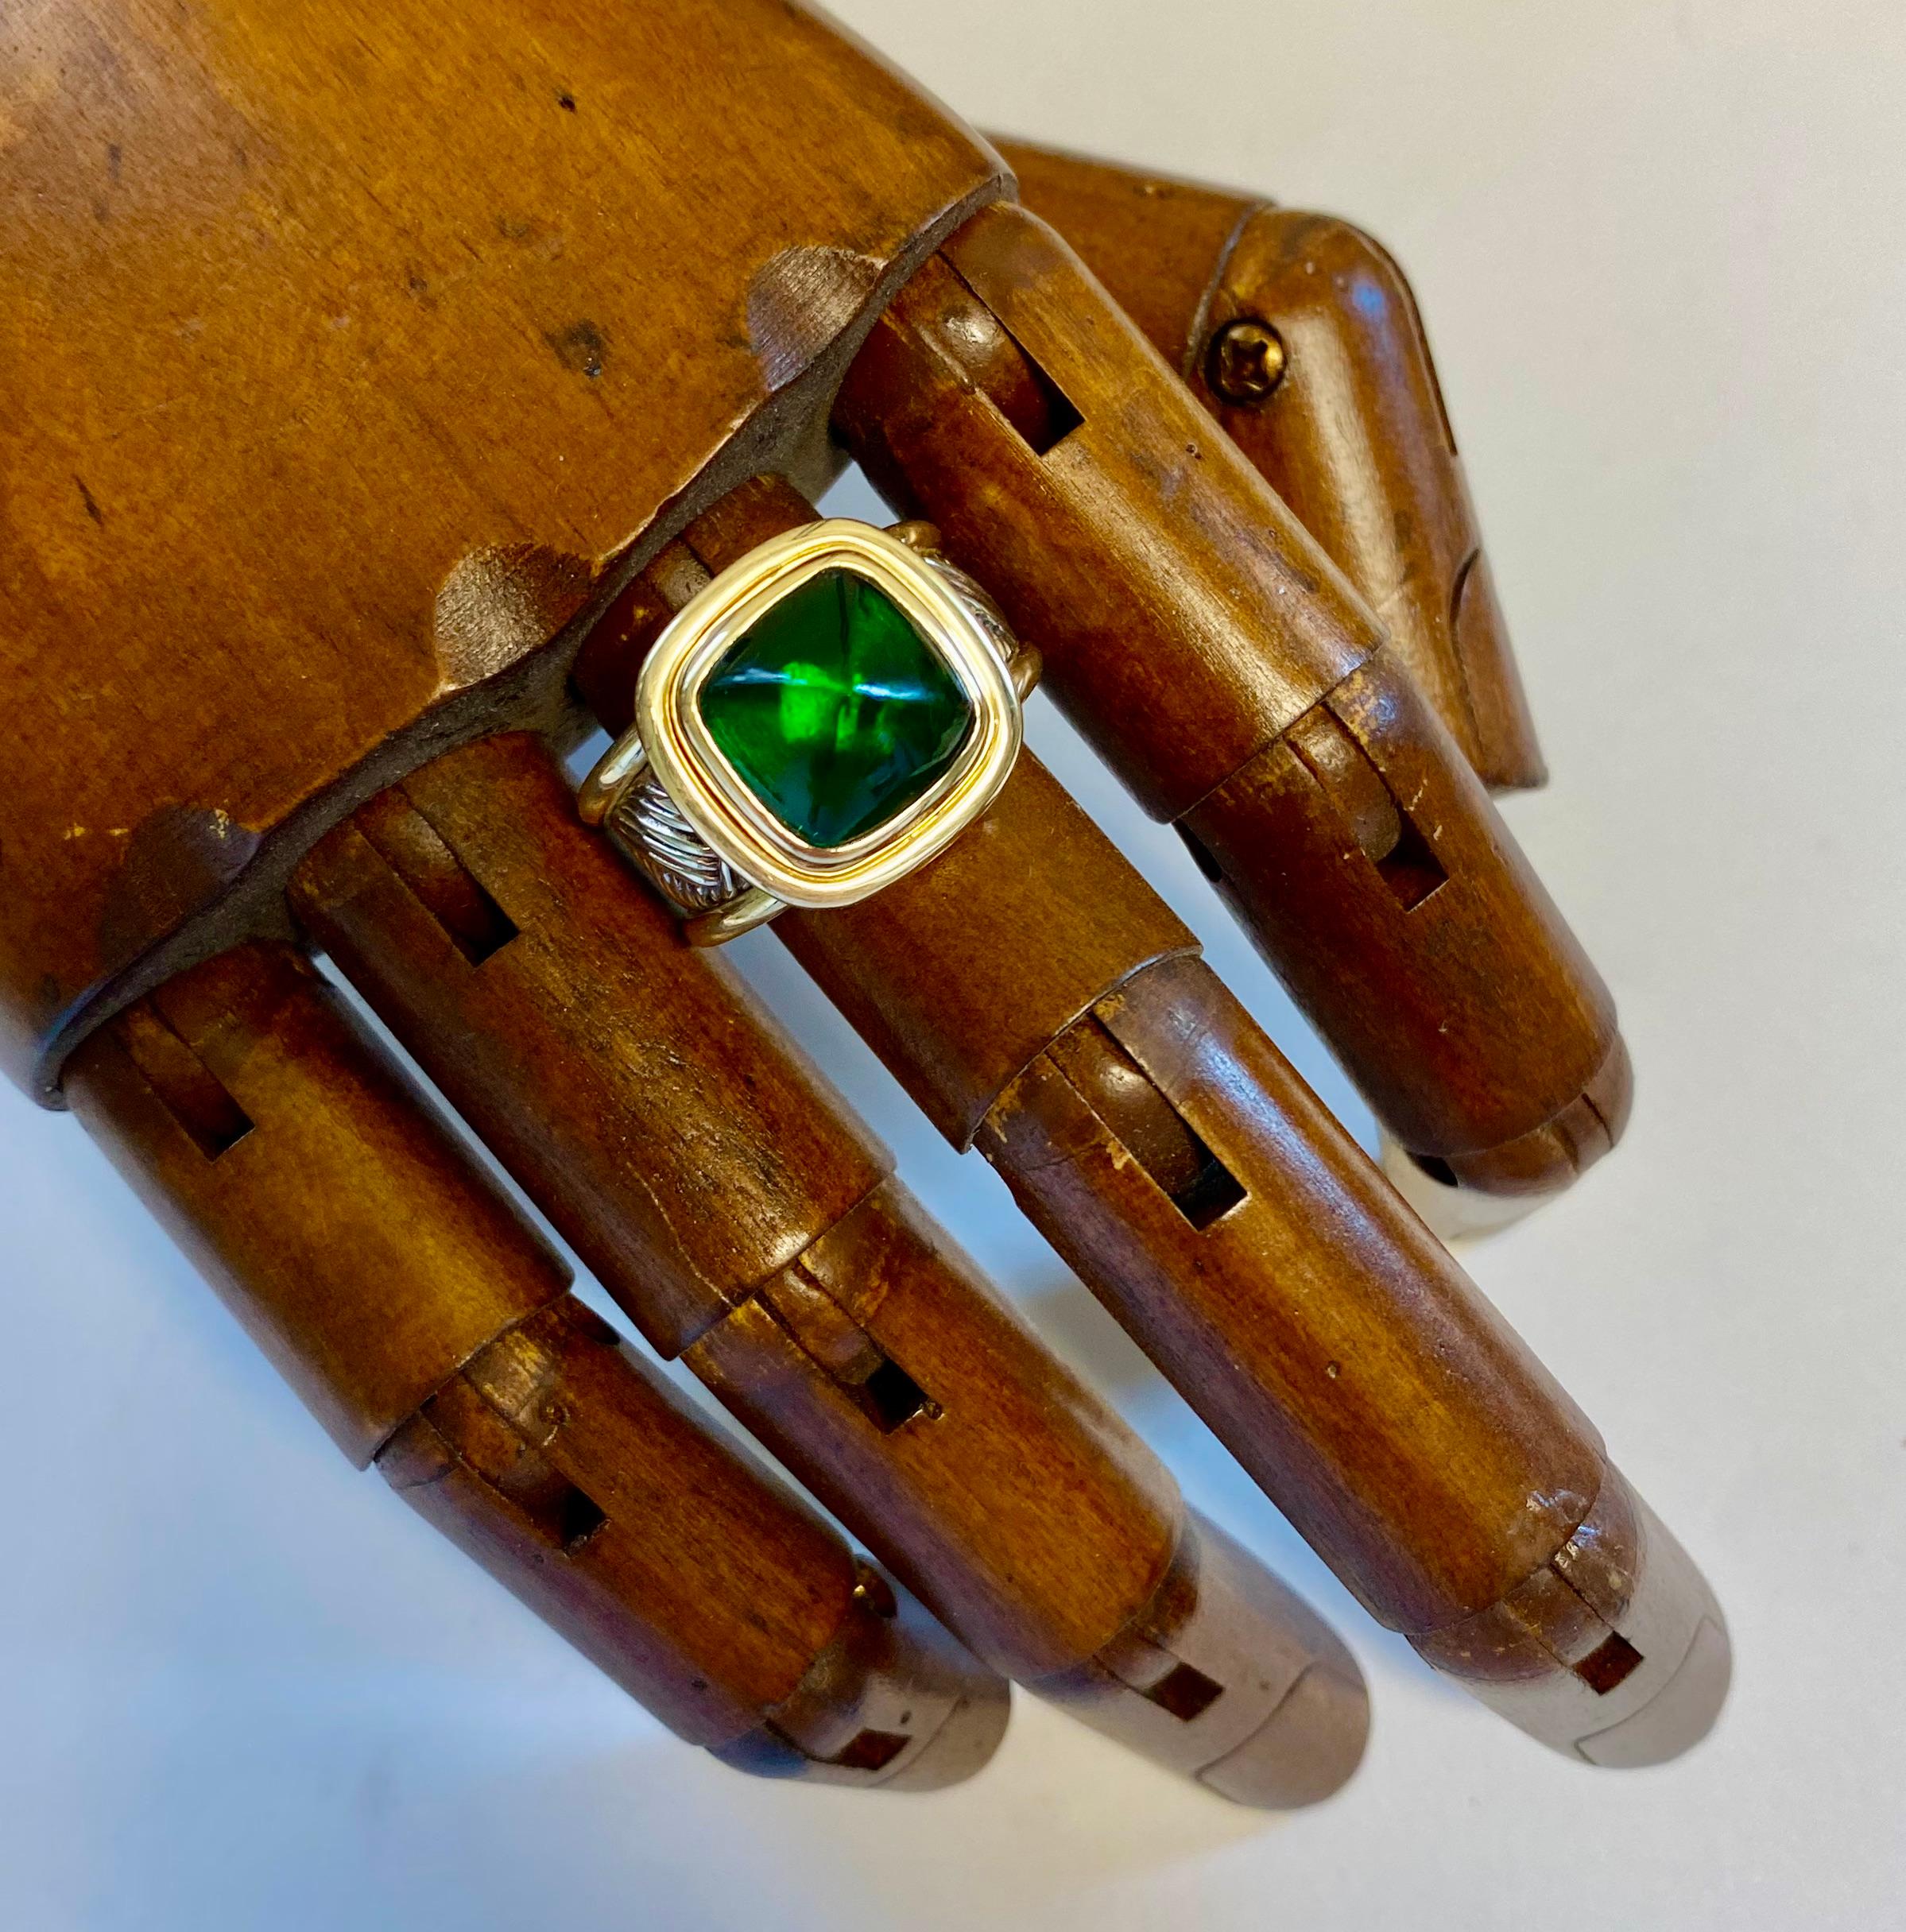 Chrome tourmaline is featured in this one-of-a-kind bombe style ring.  The tourmaline (origin: Brazil) is a rich, true green color.  It's been cut in a very desirable and unusual sugarloaf cabochon shape.  The gem is set in a one-of-a-kind